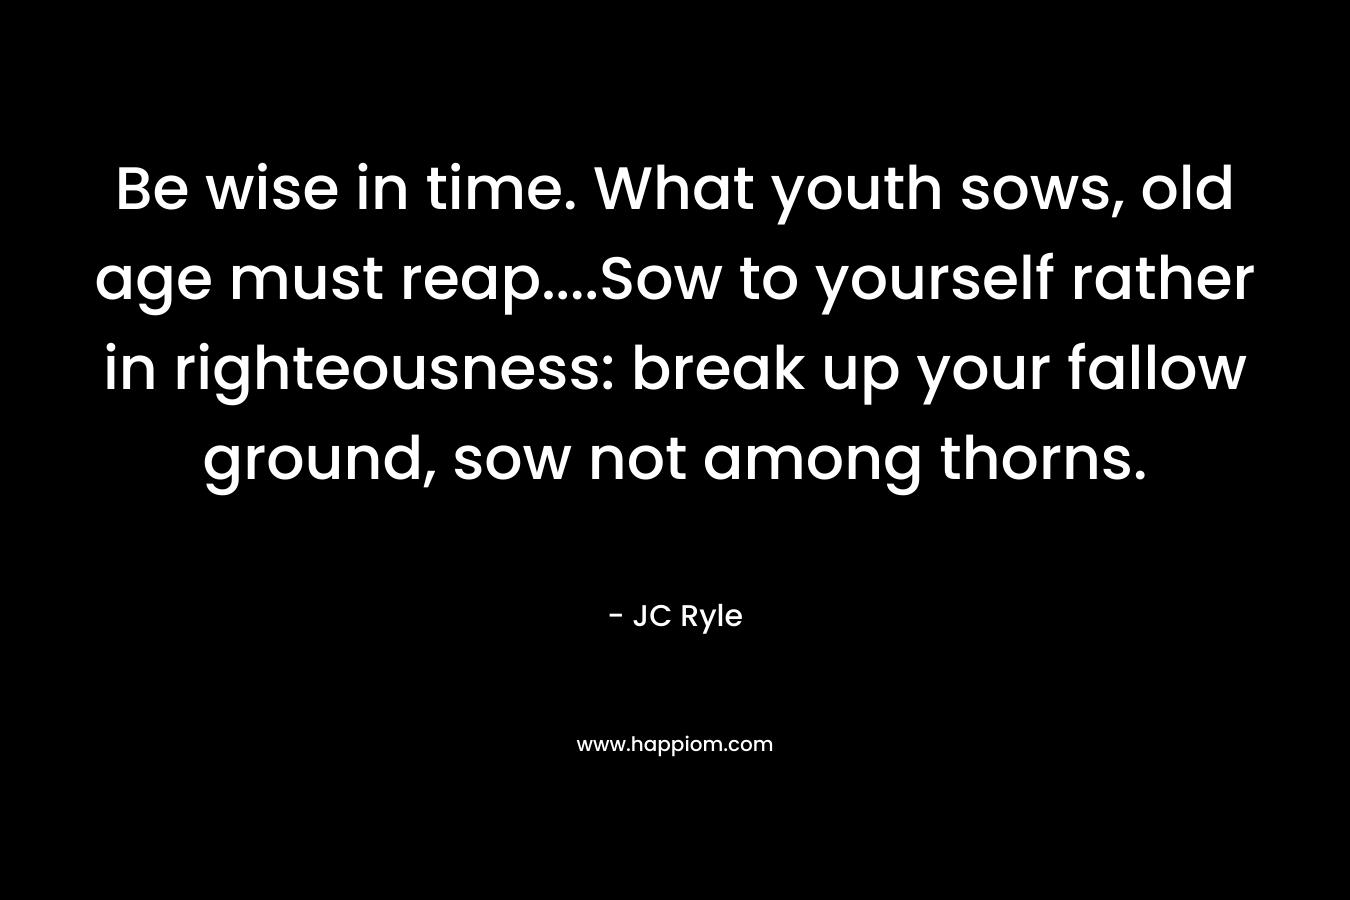 Be wise in time. What youth sows, old age must reap….Sow to yourself rather in righteousness: break up your fallow ground, sow not among thorns. – JC Ryle